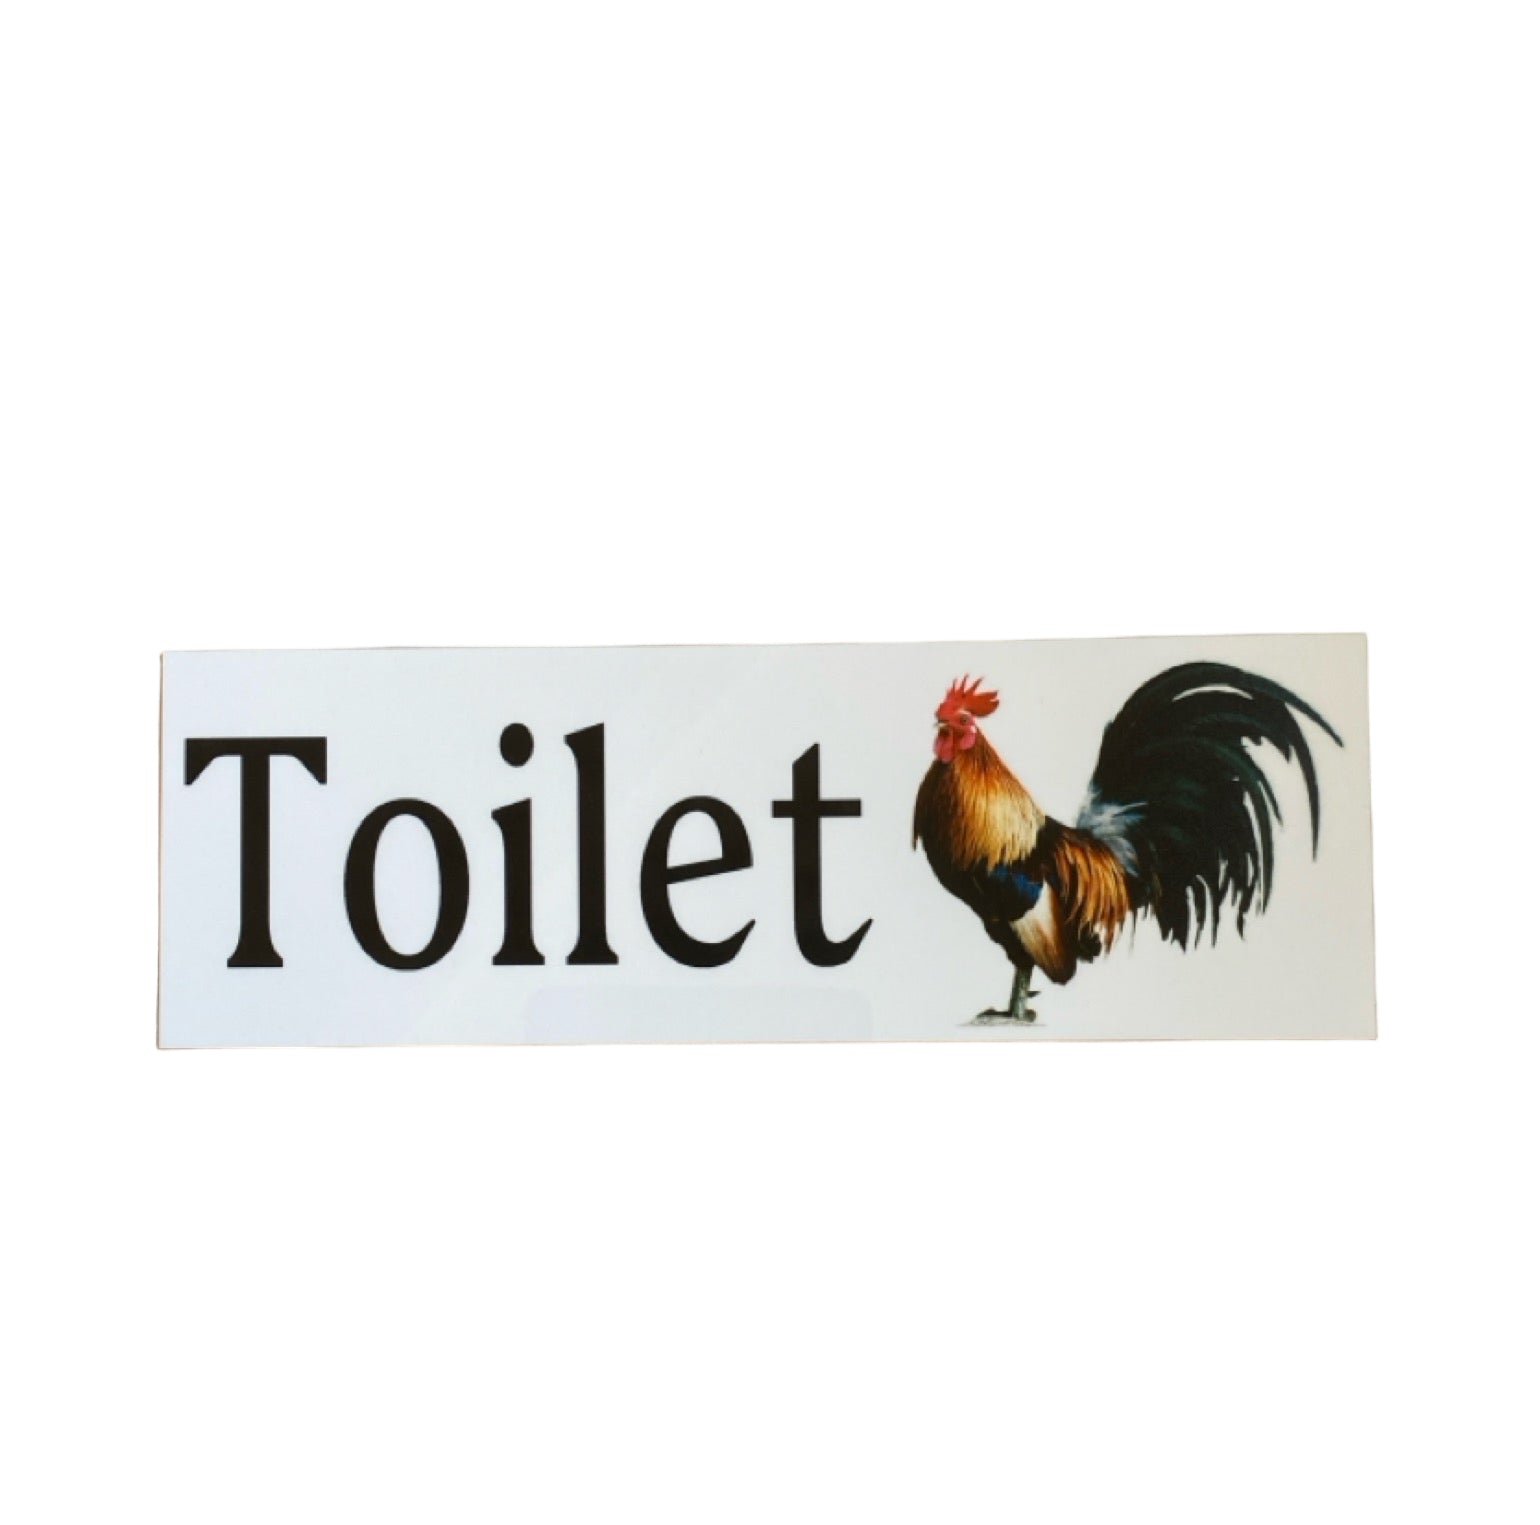 Rooster Toilet Laundry Bathroom Sign - The Renmy Store Homewares & Gifts 